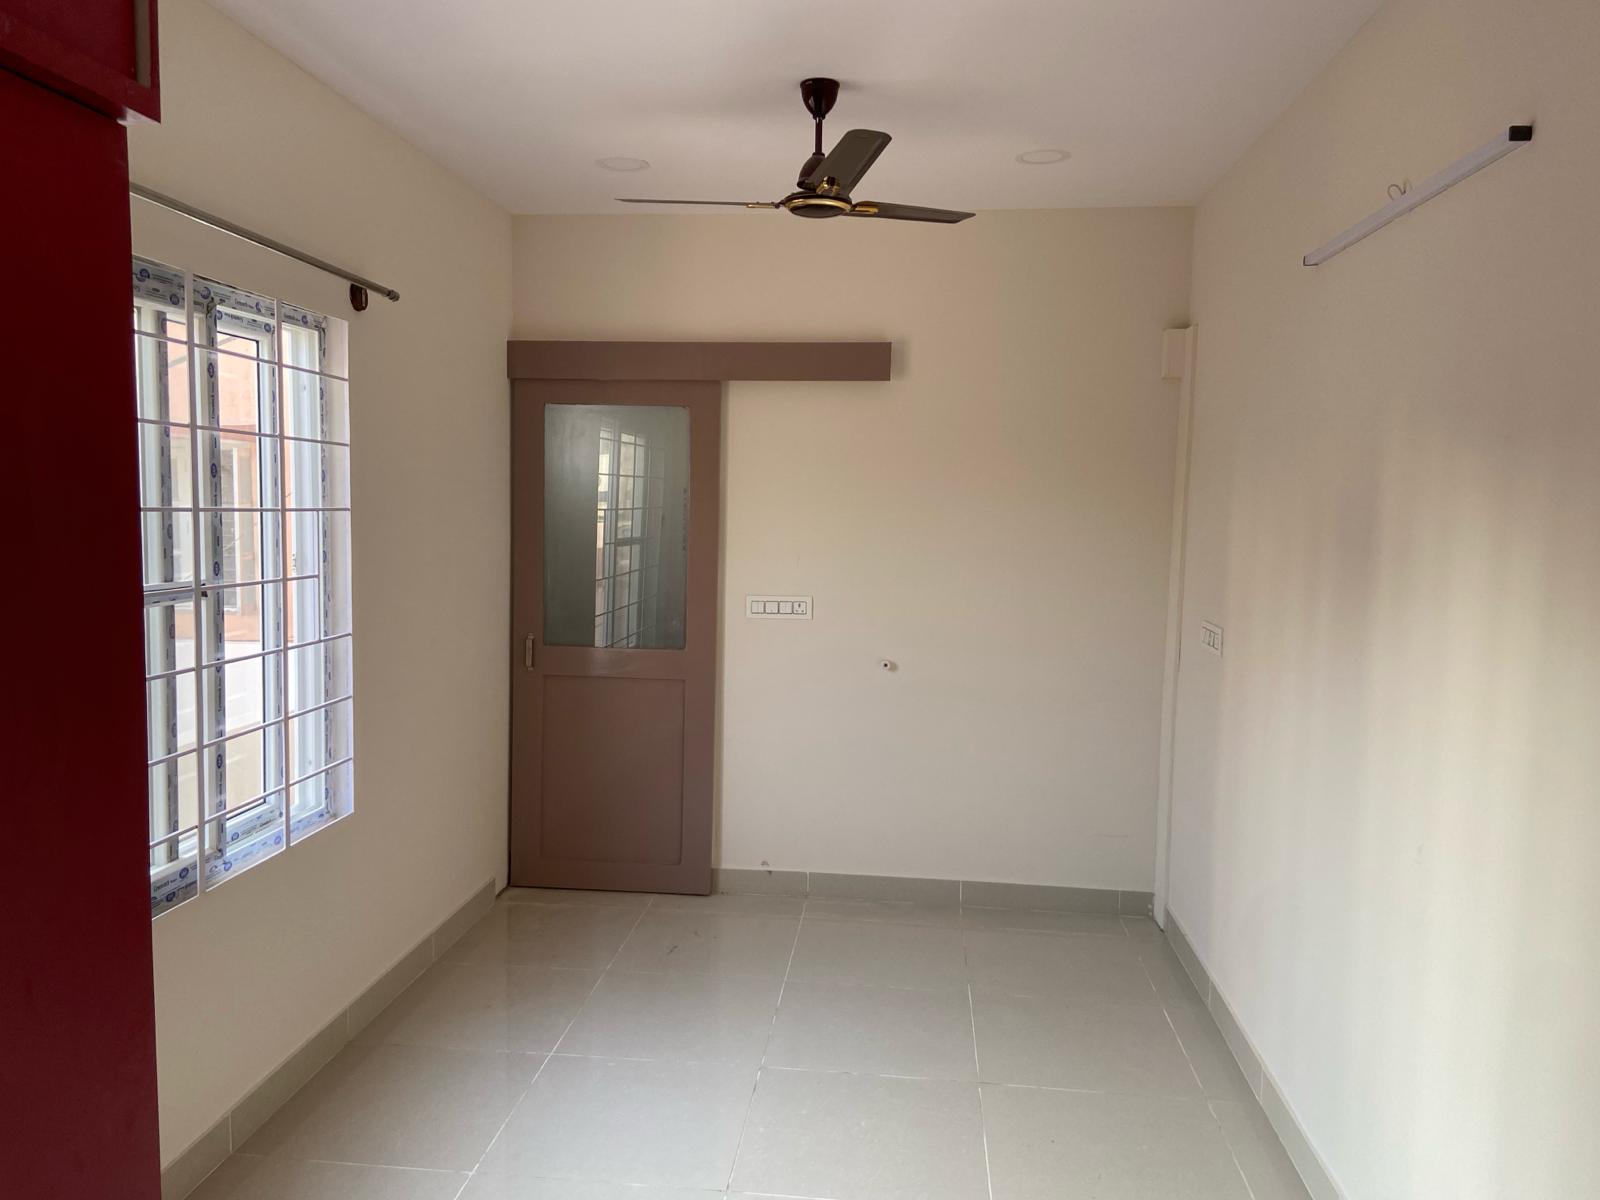 3 BHK Residential Apartment for Lease Only at JAM-6862 in Kammasandra village